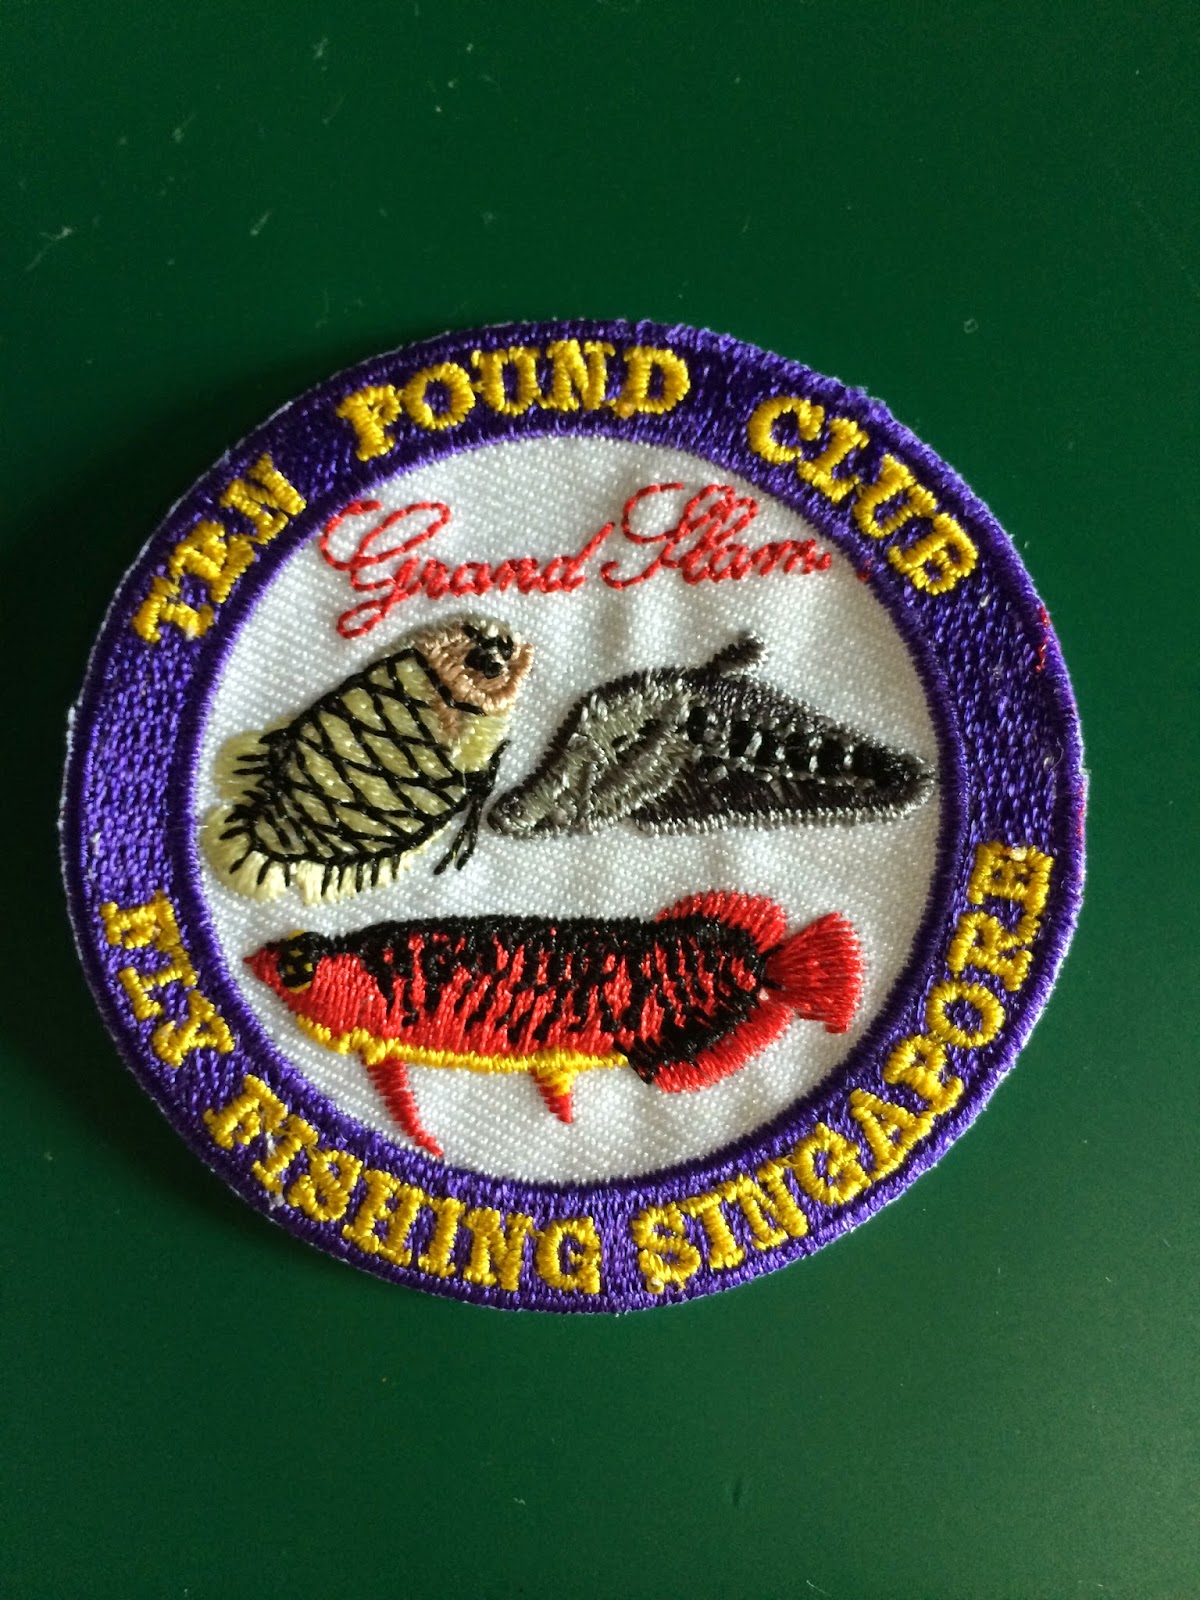 Fly Fishing Journal: More Badges